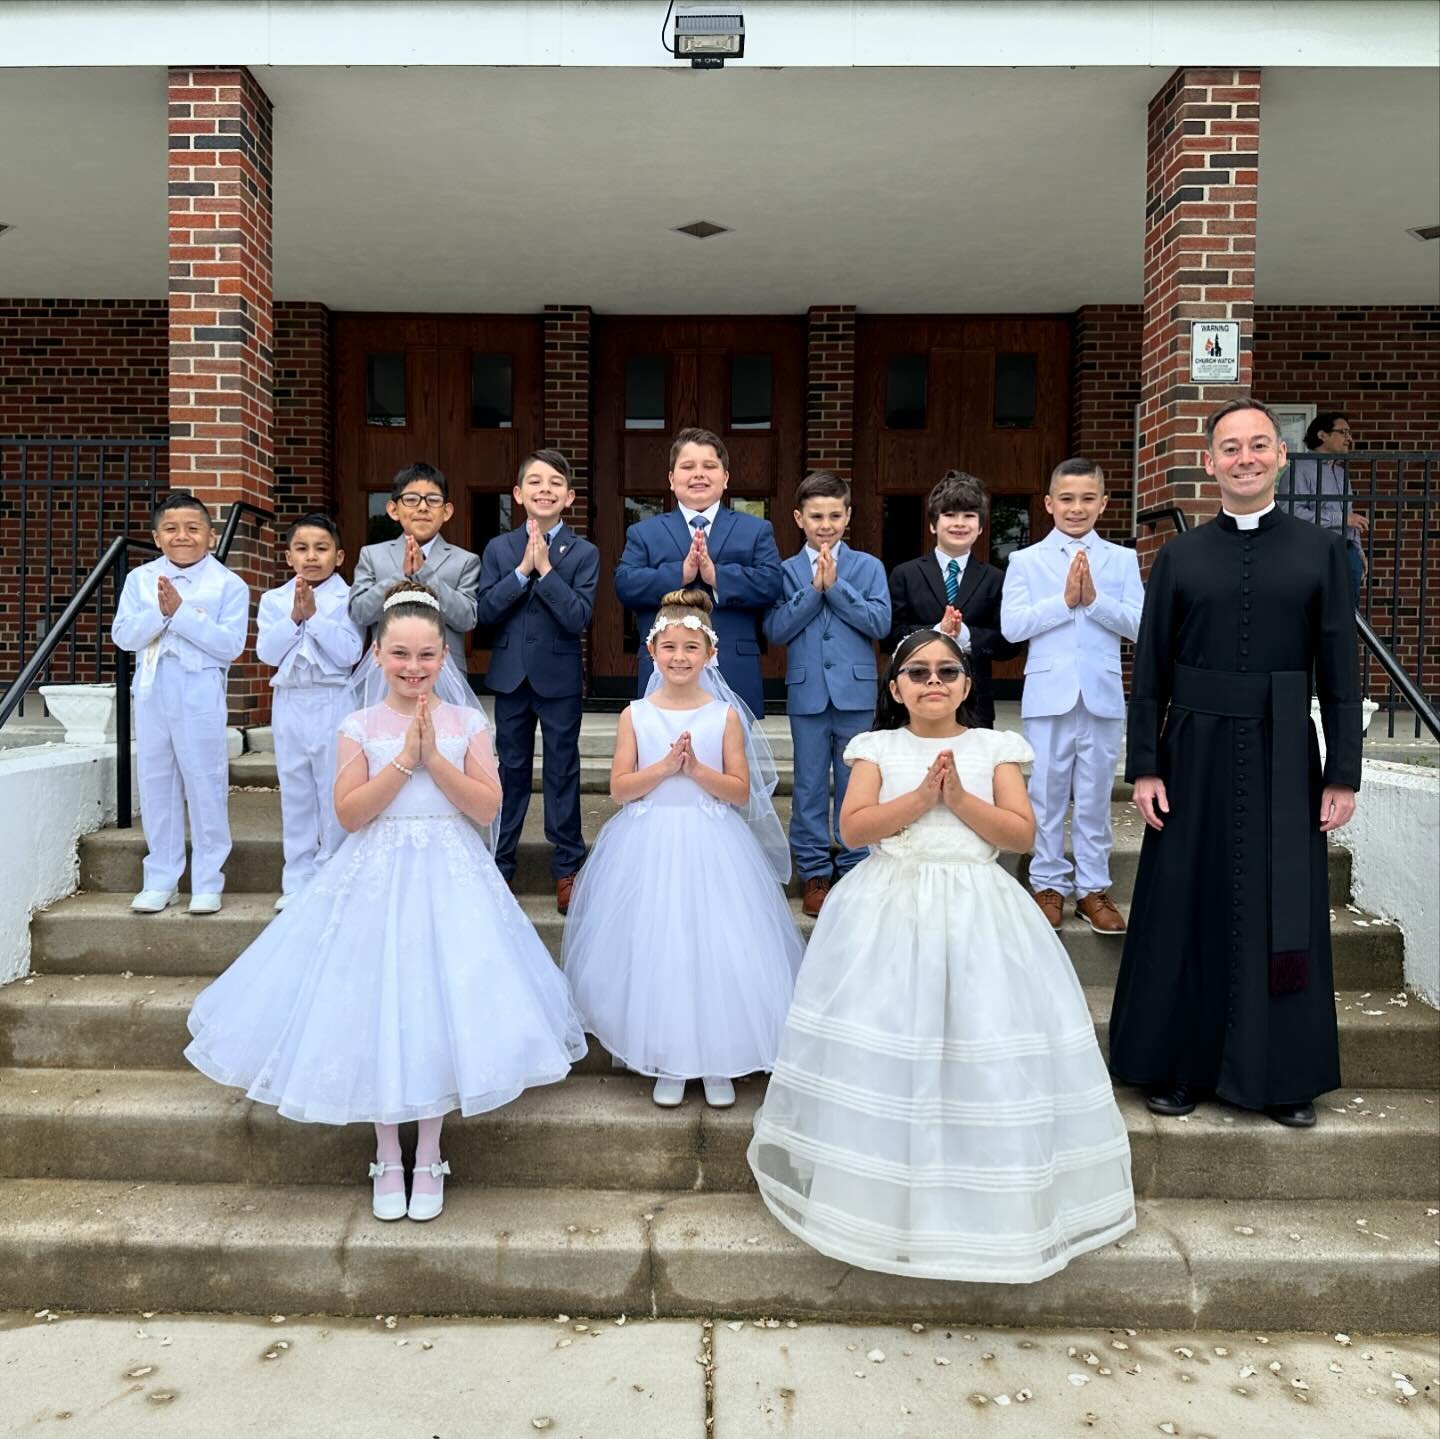 Congratulations and may God bless our First Communicants on this special day! May Jesus enter your hearts and always be your close friend! 

During Mass the children presented flowers to the Blessed Mother and crowned her. They were also enrolled in 